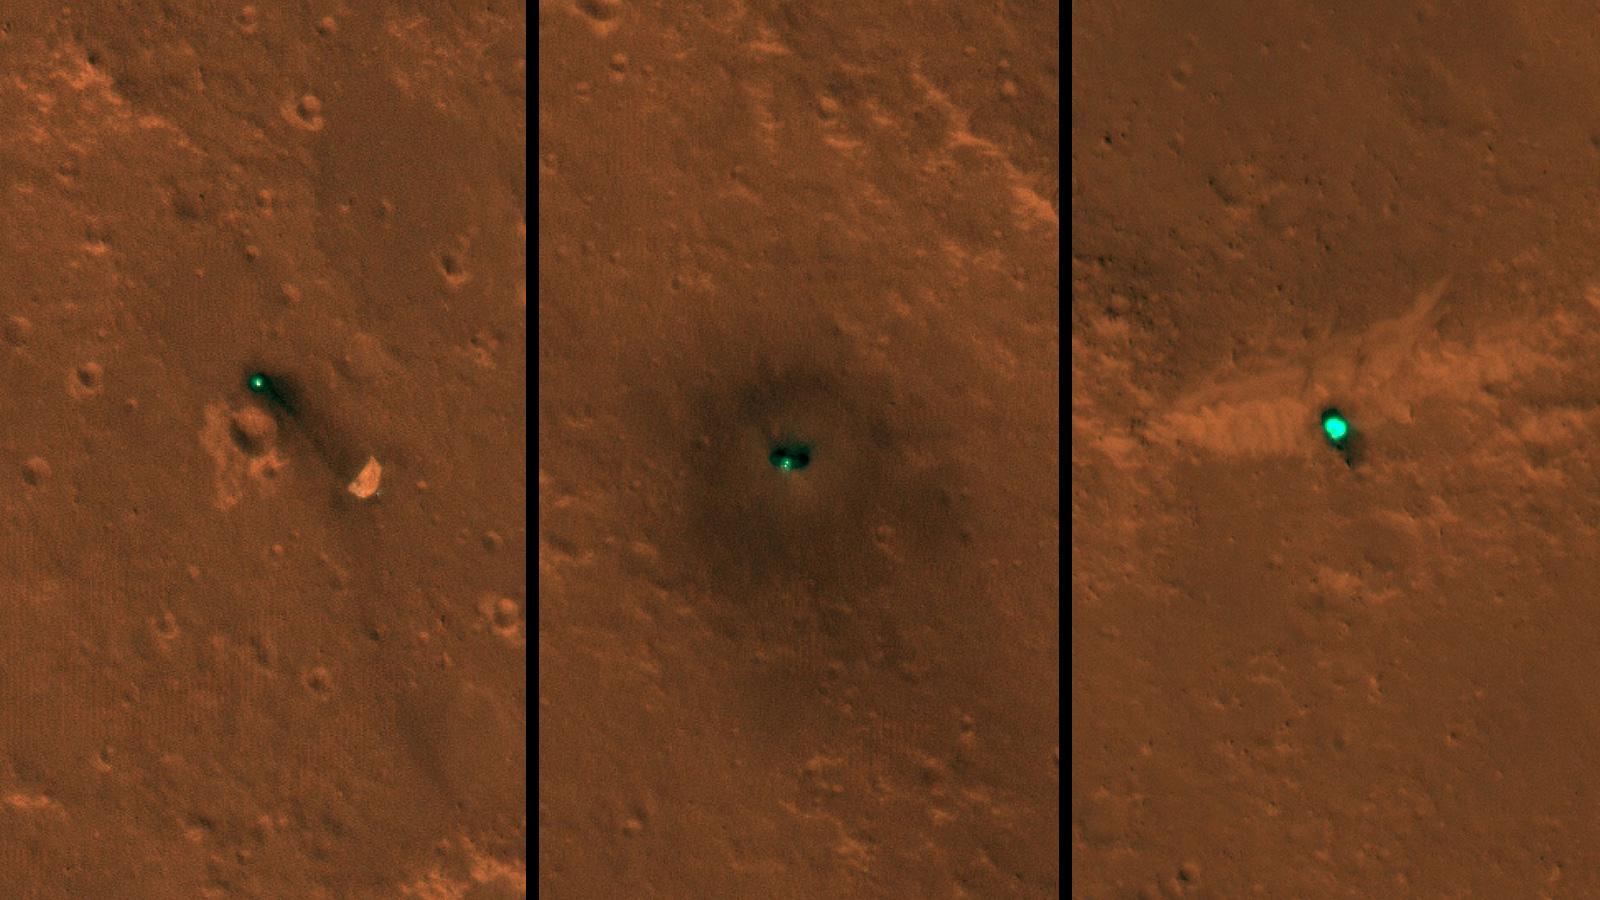 three views of hardware on the surface of mars as seen from above